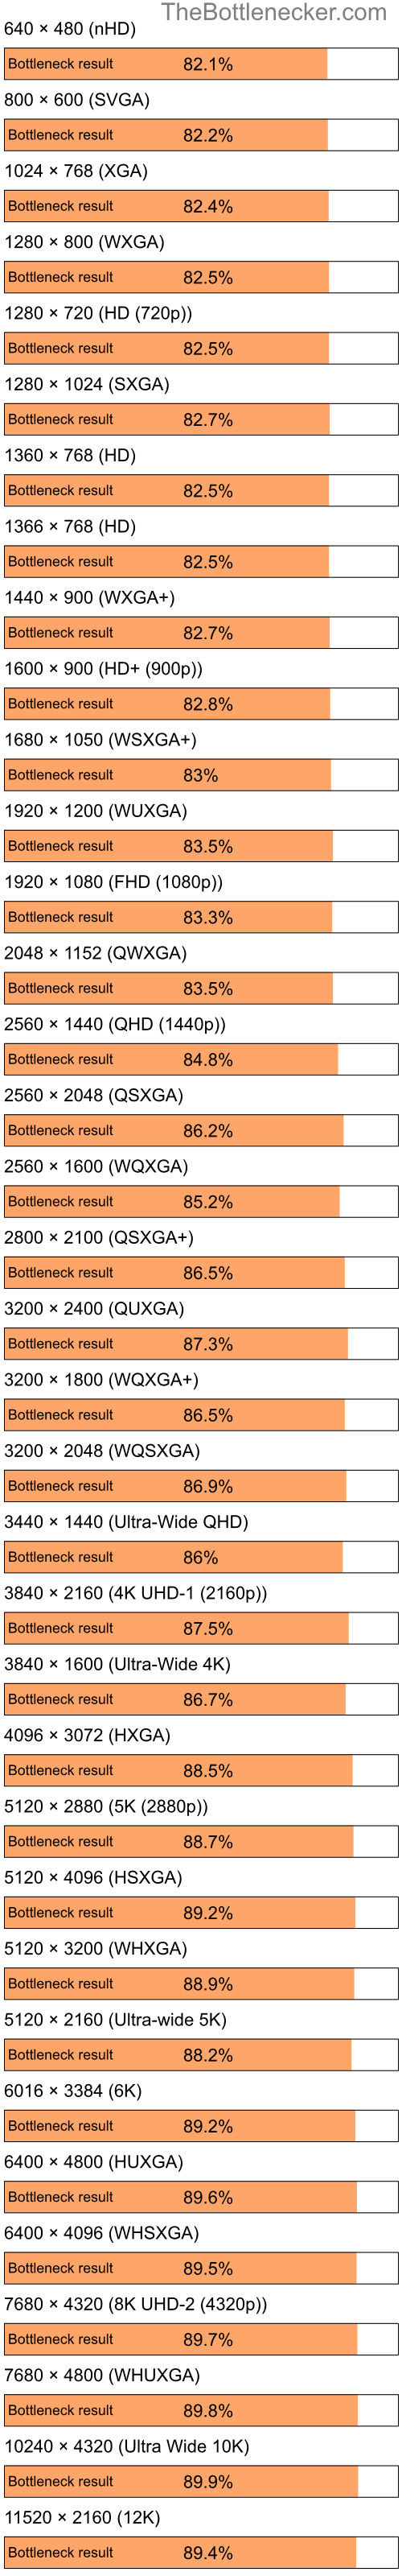 Bottleneck results by resolution for Intel Atom Z520 and AMD Radeon Xpress 1150 in Graphic Card Intense Tasks